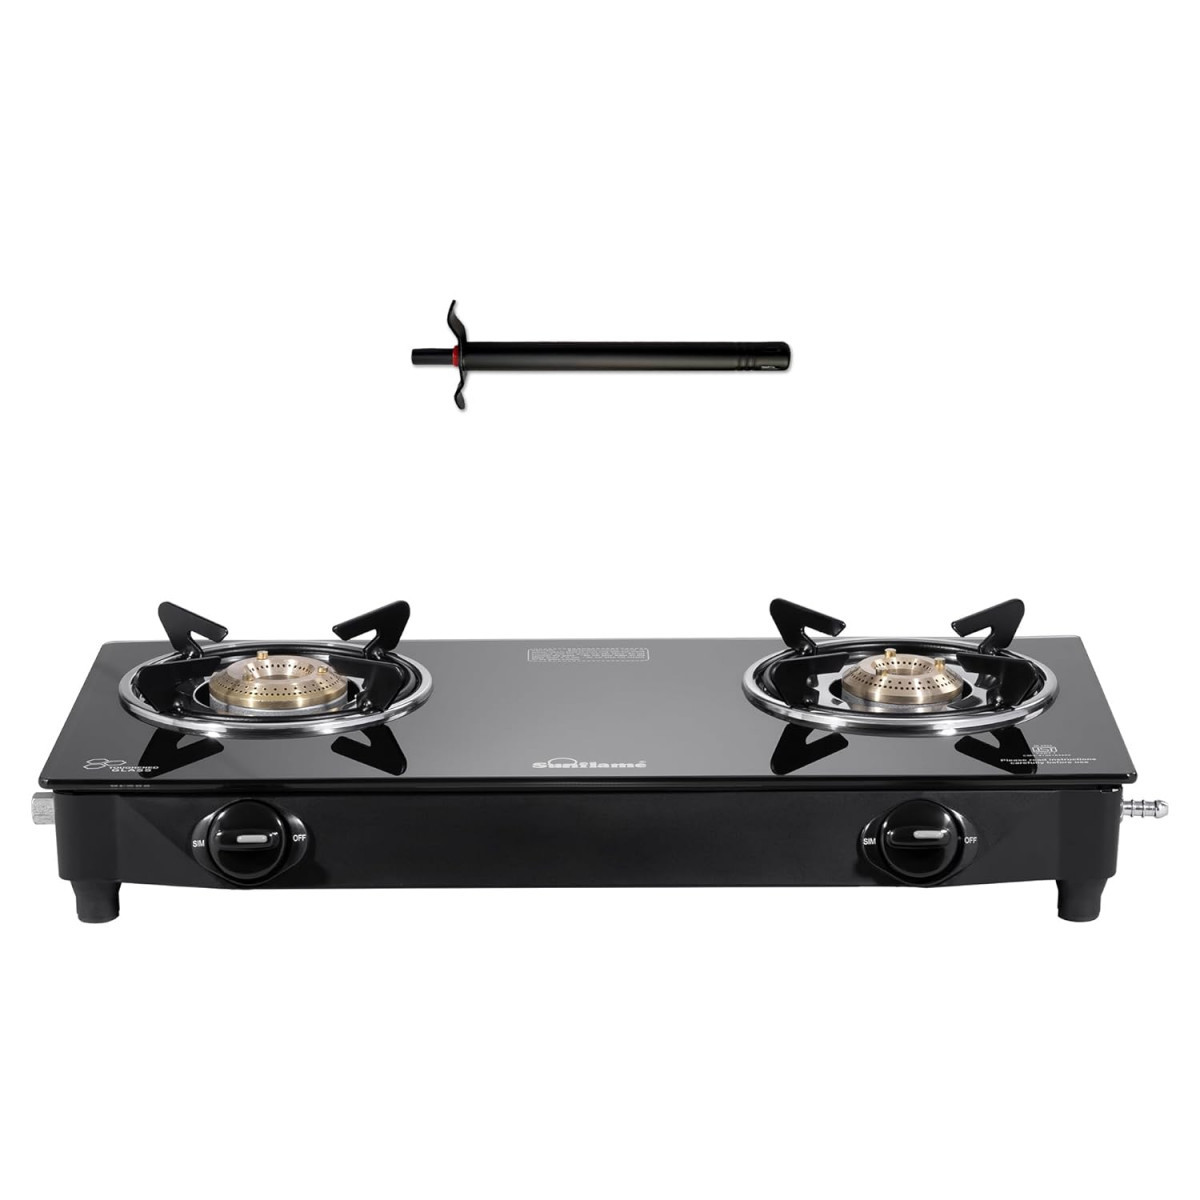 Sunflame Maleo 2 Burner Gas Stove  Space Saving Design  Complimentary Lighter  1 Medium  1 Small Brass Burners  2 Years Product Coverage  Toughened Glass Top  Pan India Presence